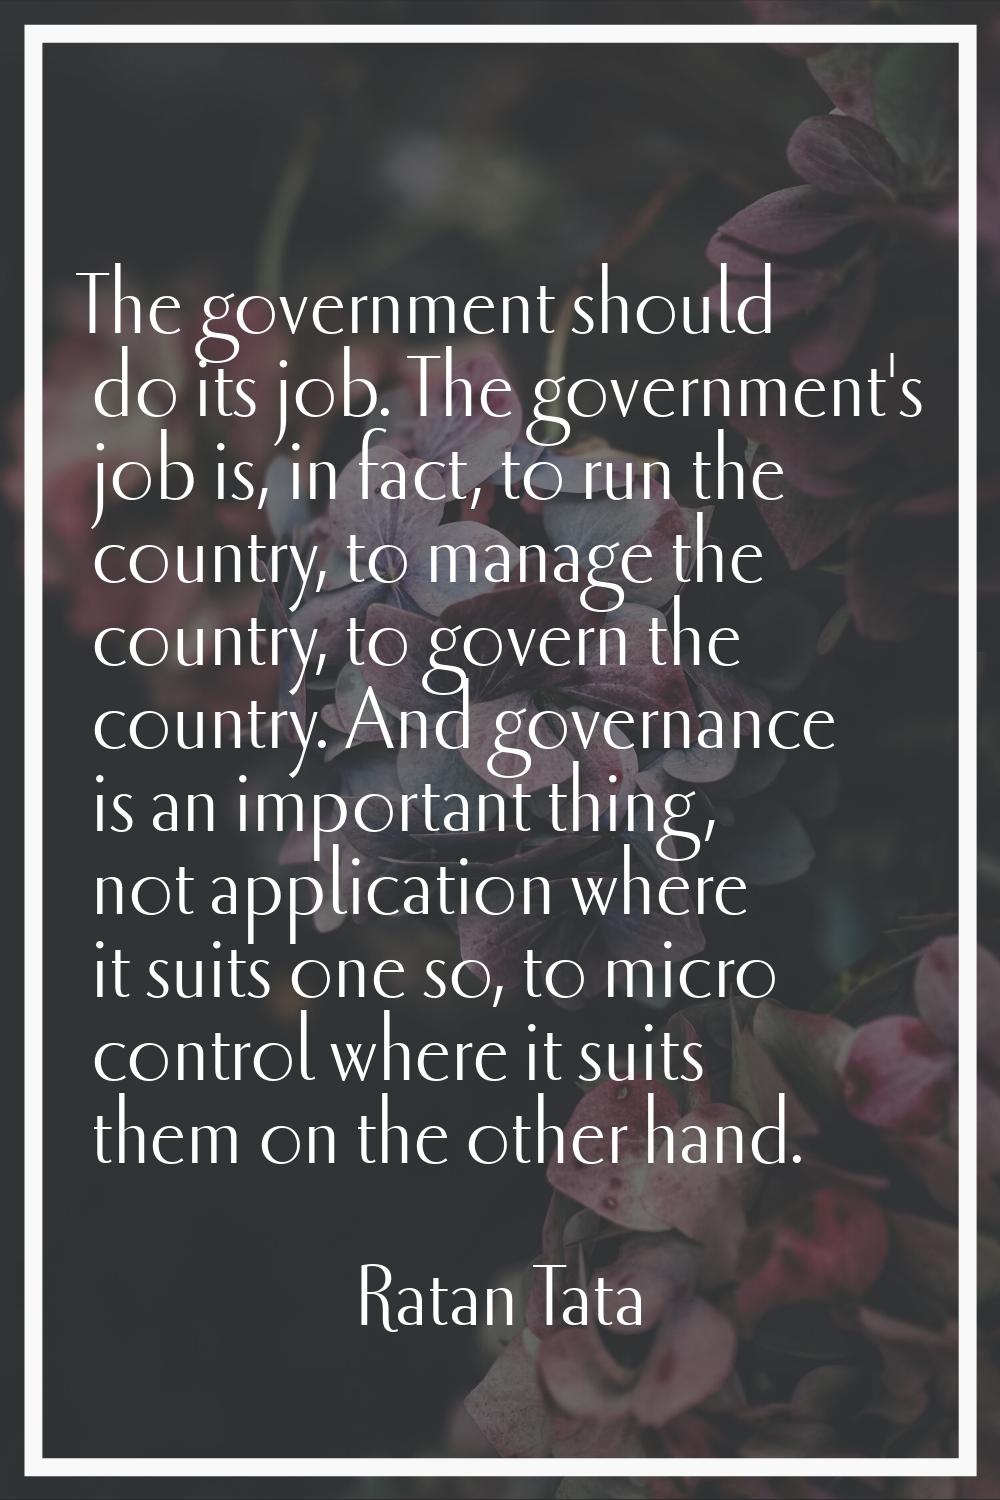 The government should do its job. The government's job is, in fact, to run the country, to manage t